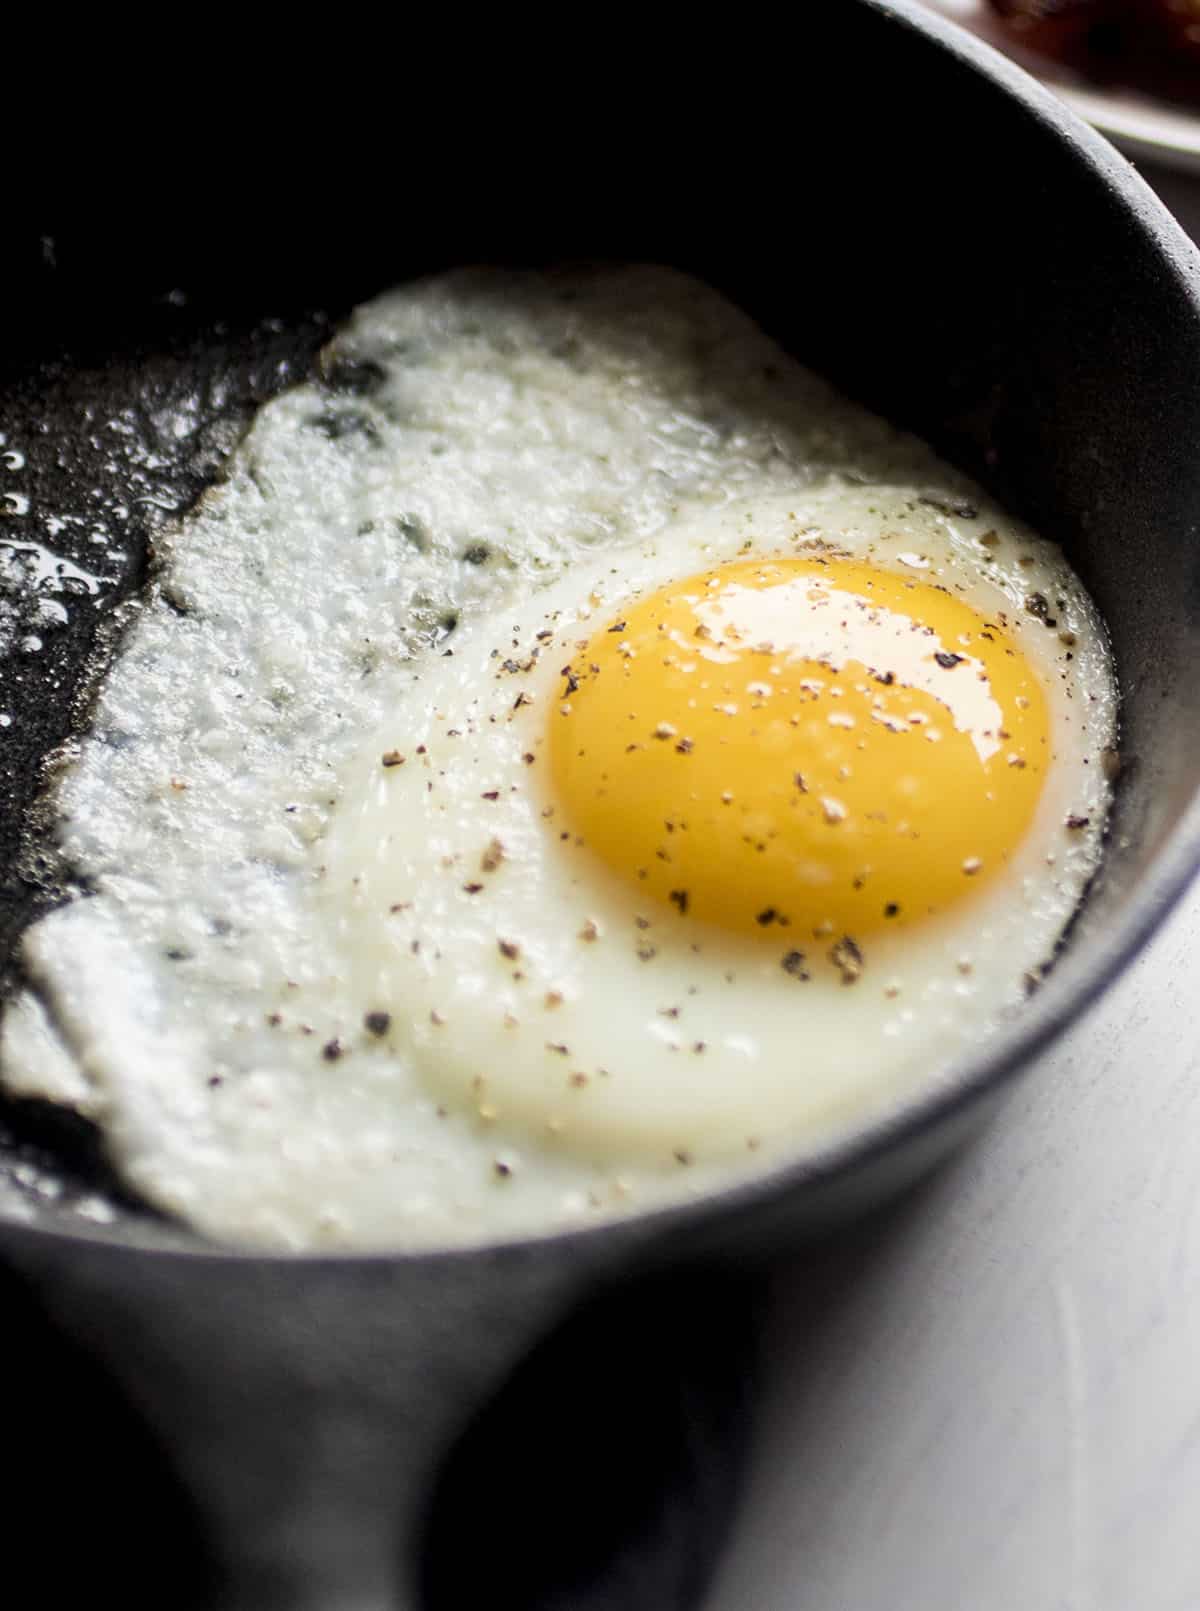 Sunny side up egg in a small cast iron skillet.